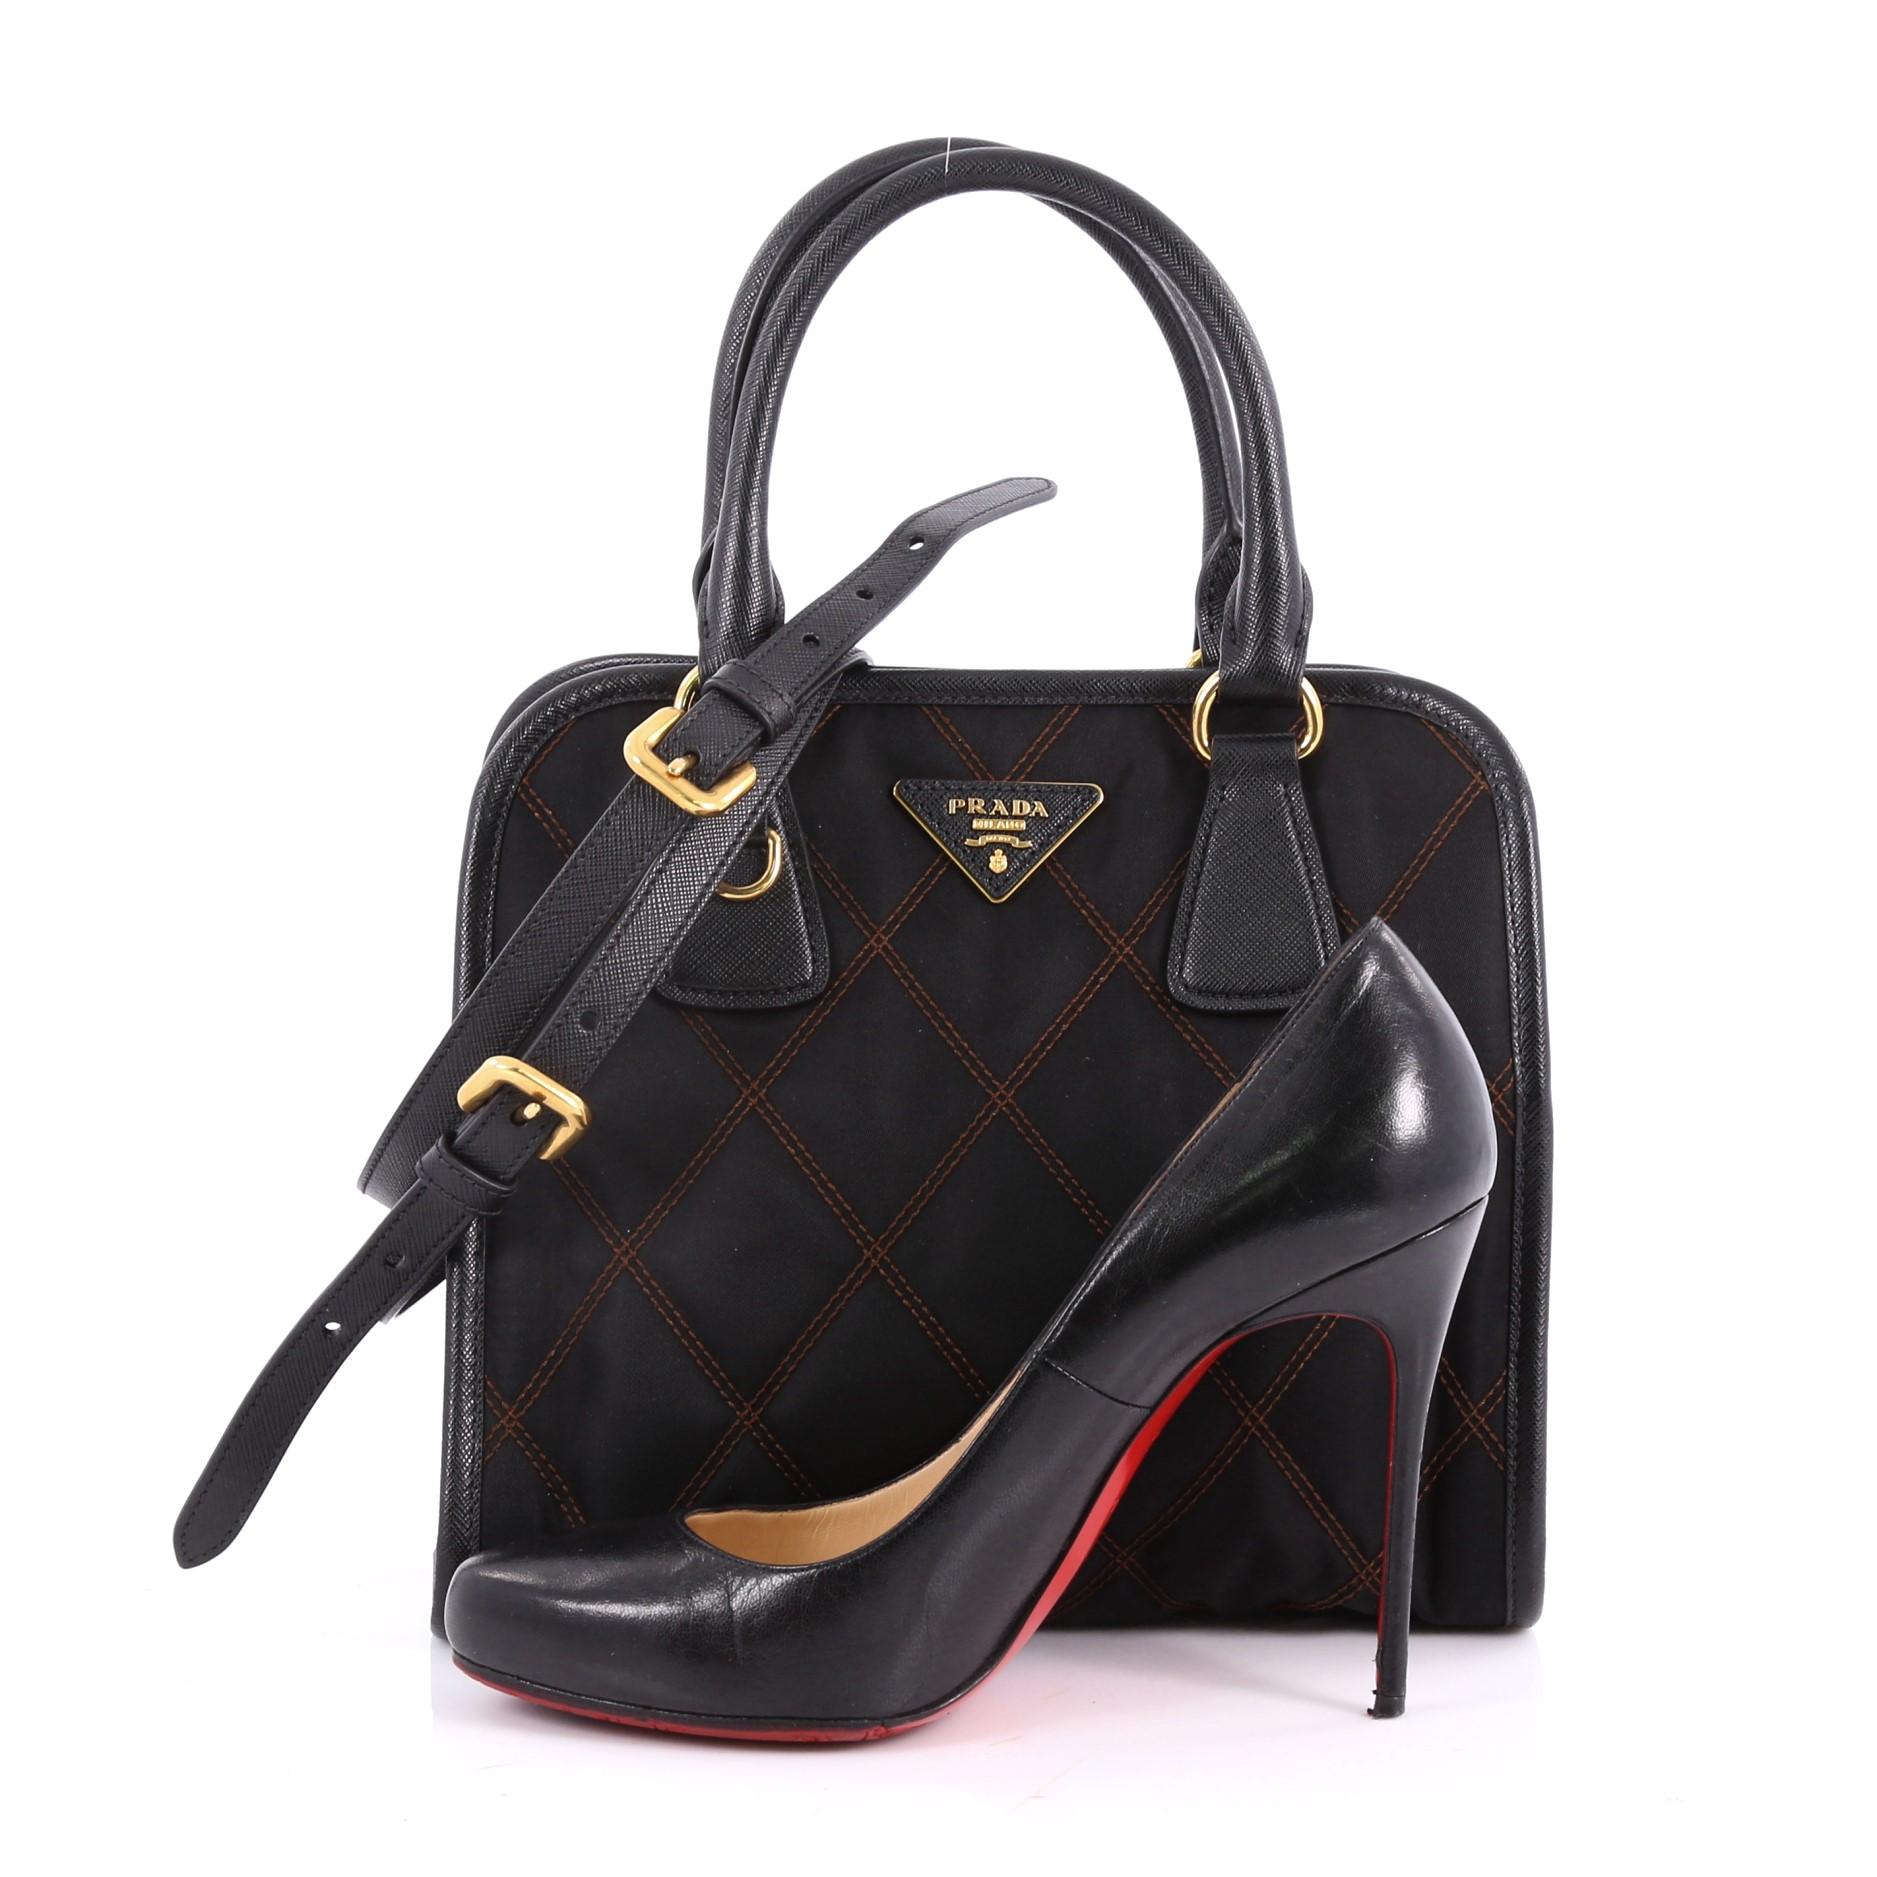 This authentic Prada Impunturato Convertible Tote Quilted Tessuto Small is the perfect bag to complete any outfit. Crafted from black impunturato quilted tessuto, this boxy tote features Prada logo, dual-rolled leather handles and gold-tone hardware